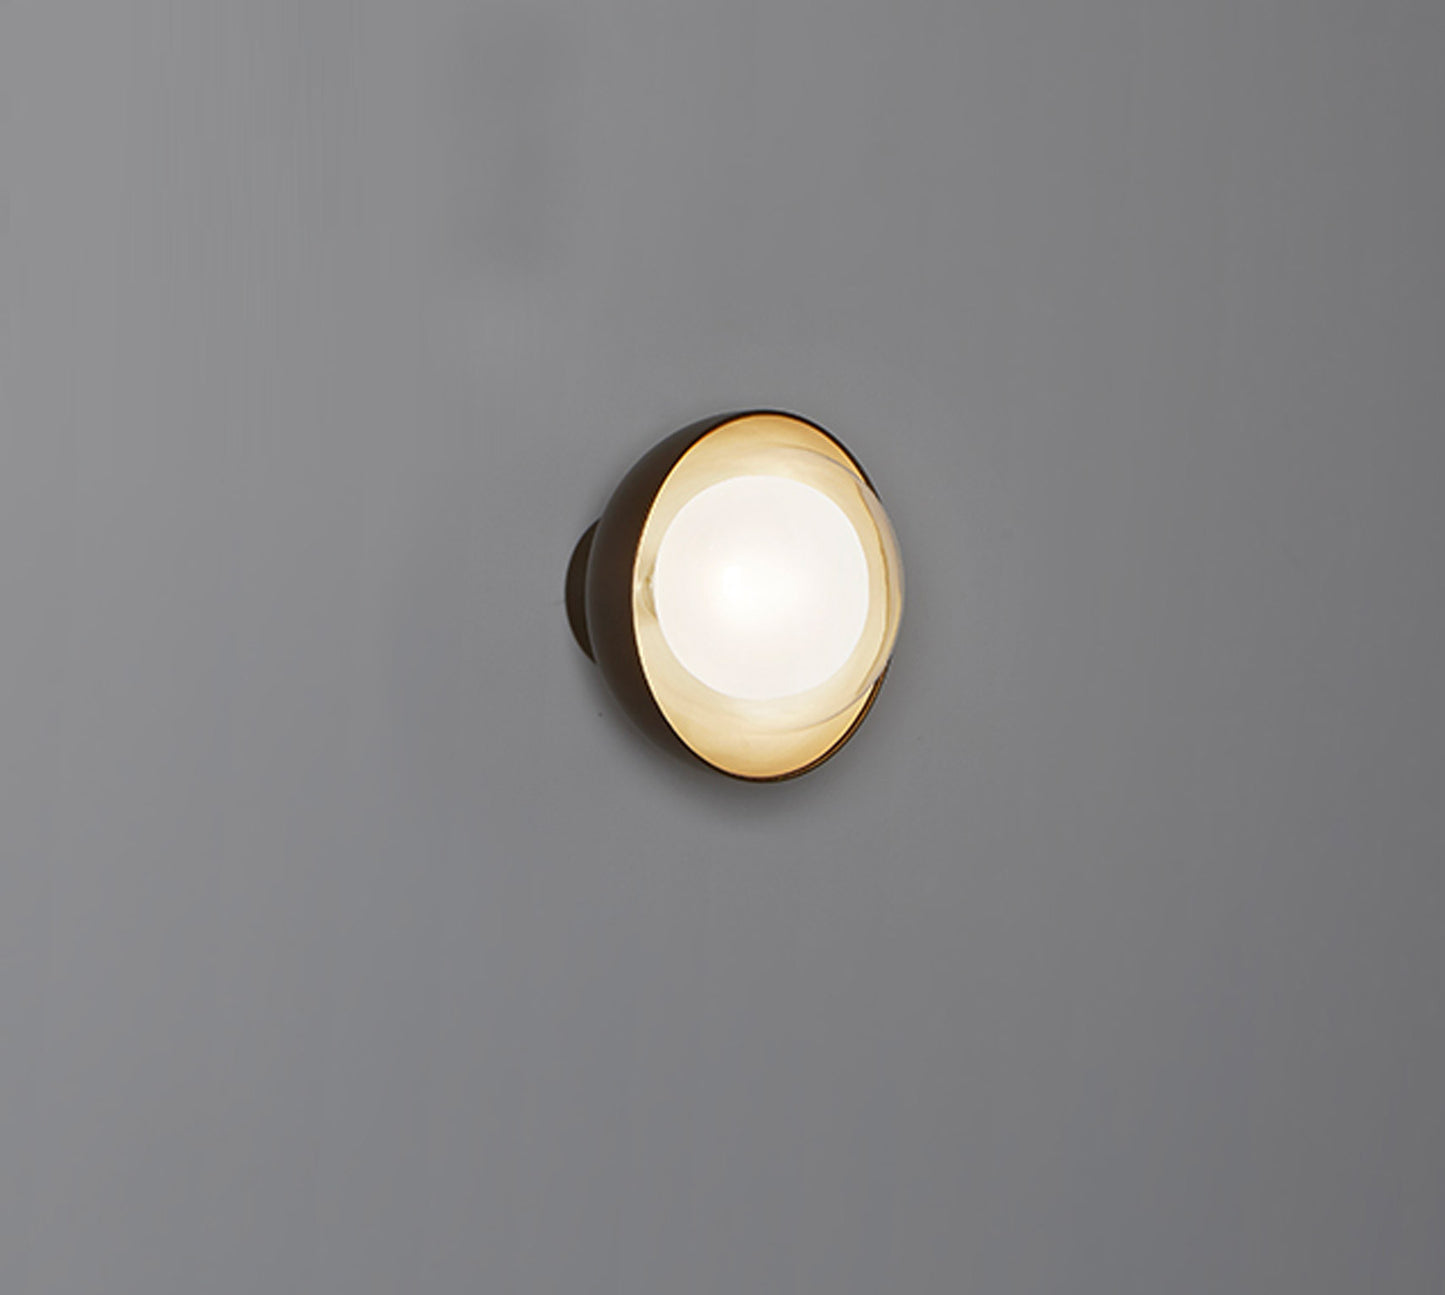 MUSE WALL/ CEILING LIGHT 554.71 BY TOOY $388.50